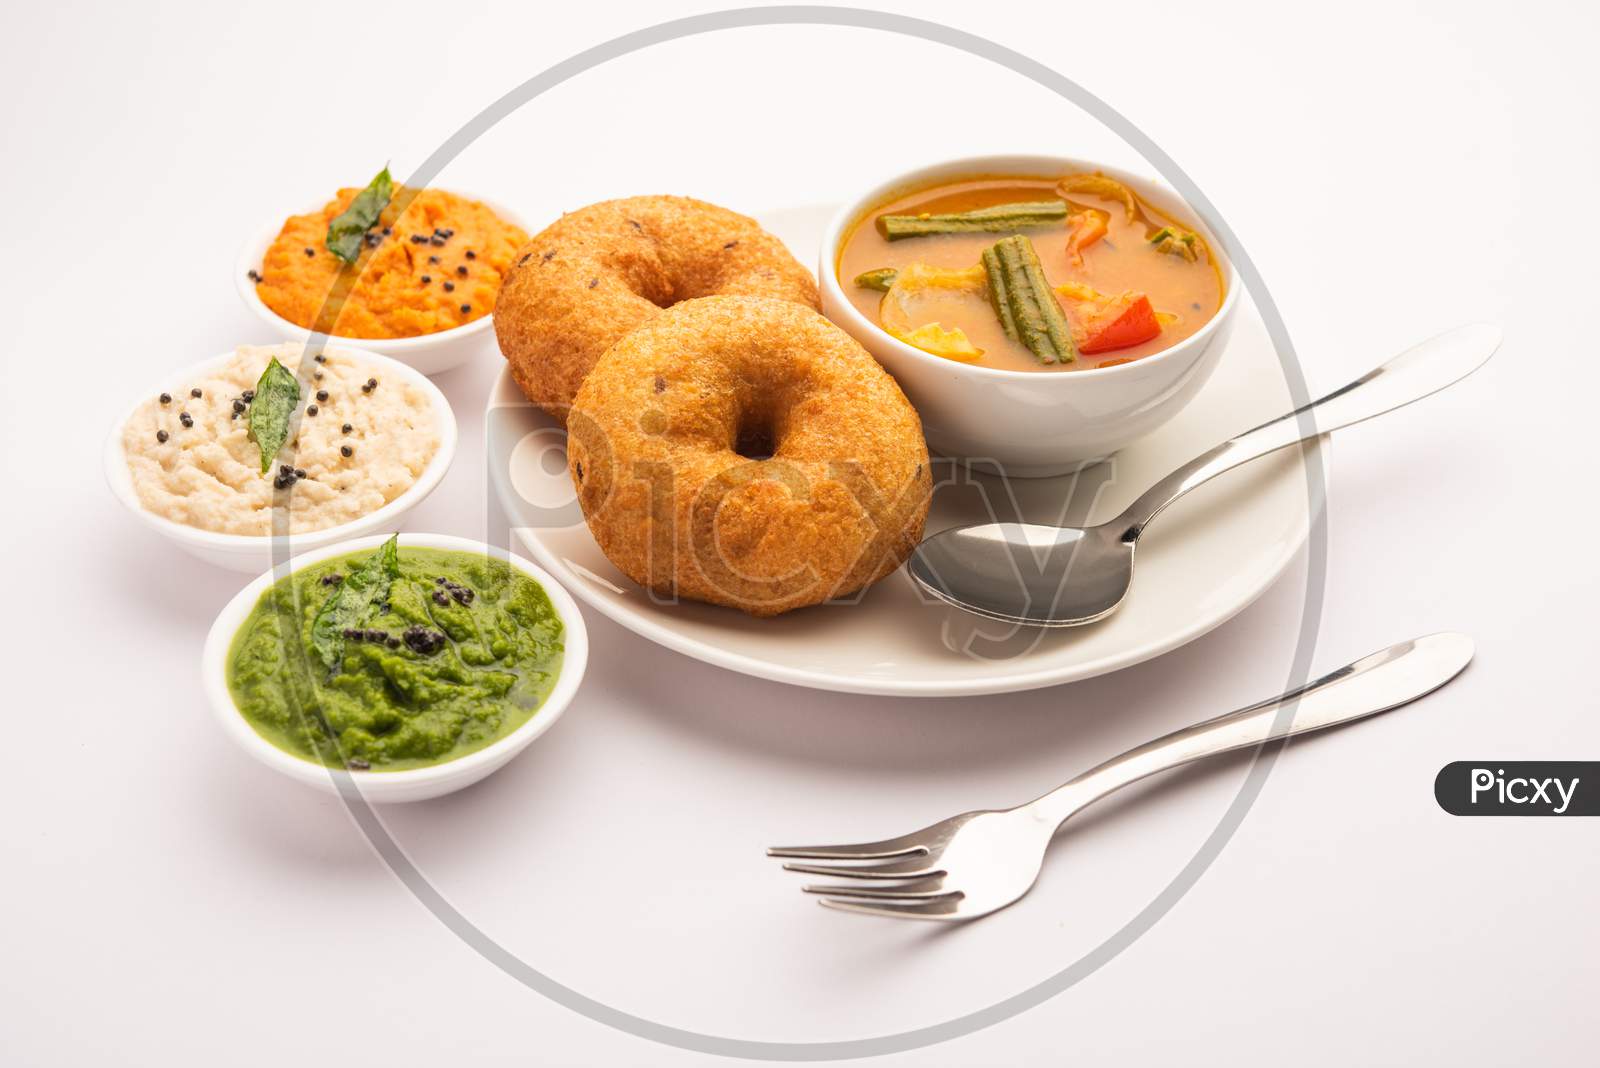 Medu Vada Or Sambar Vada, A Popular South Indian Food Served With Different Chutney